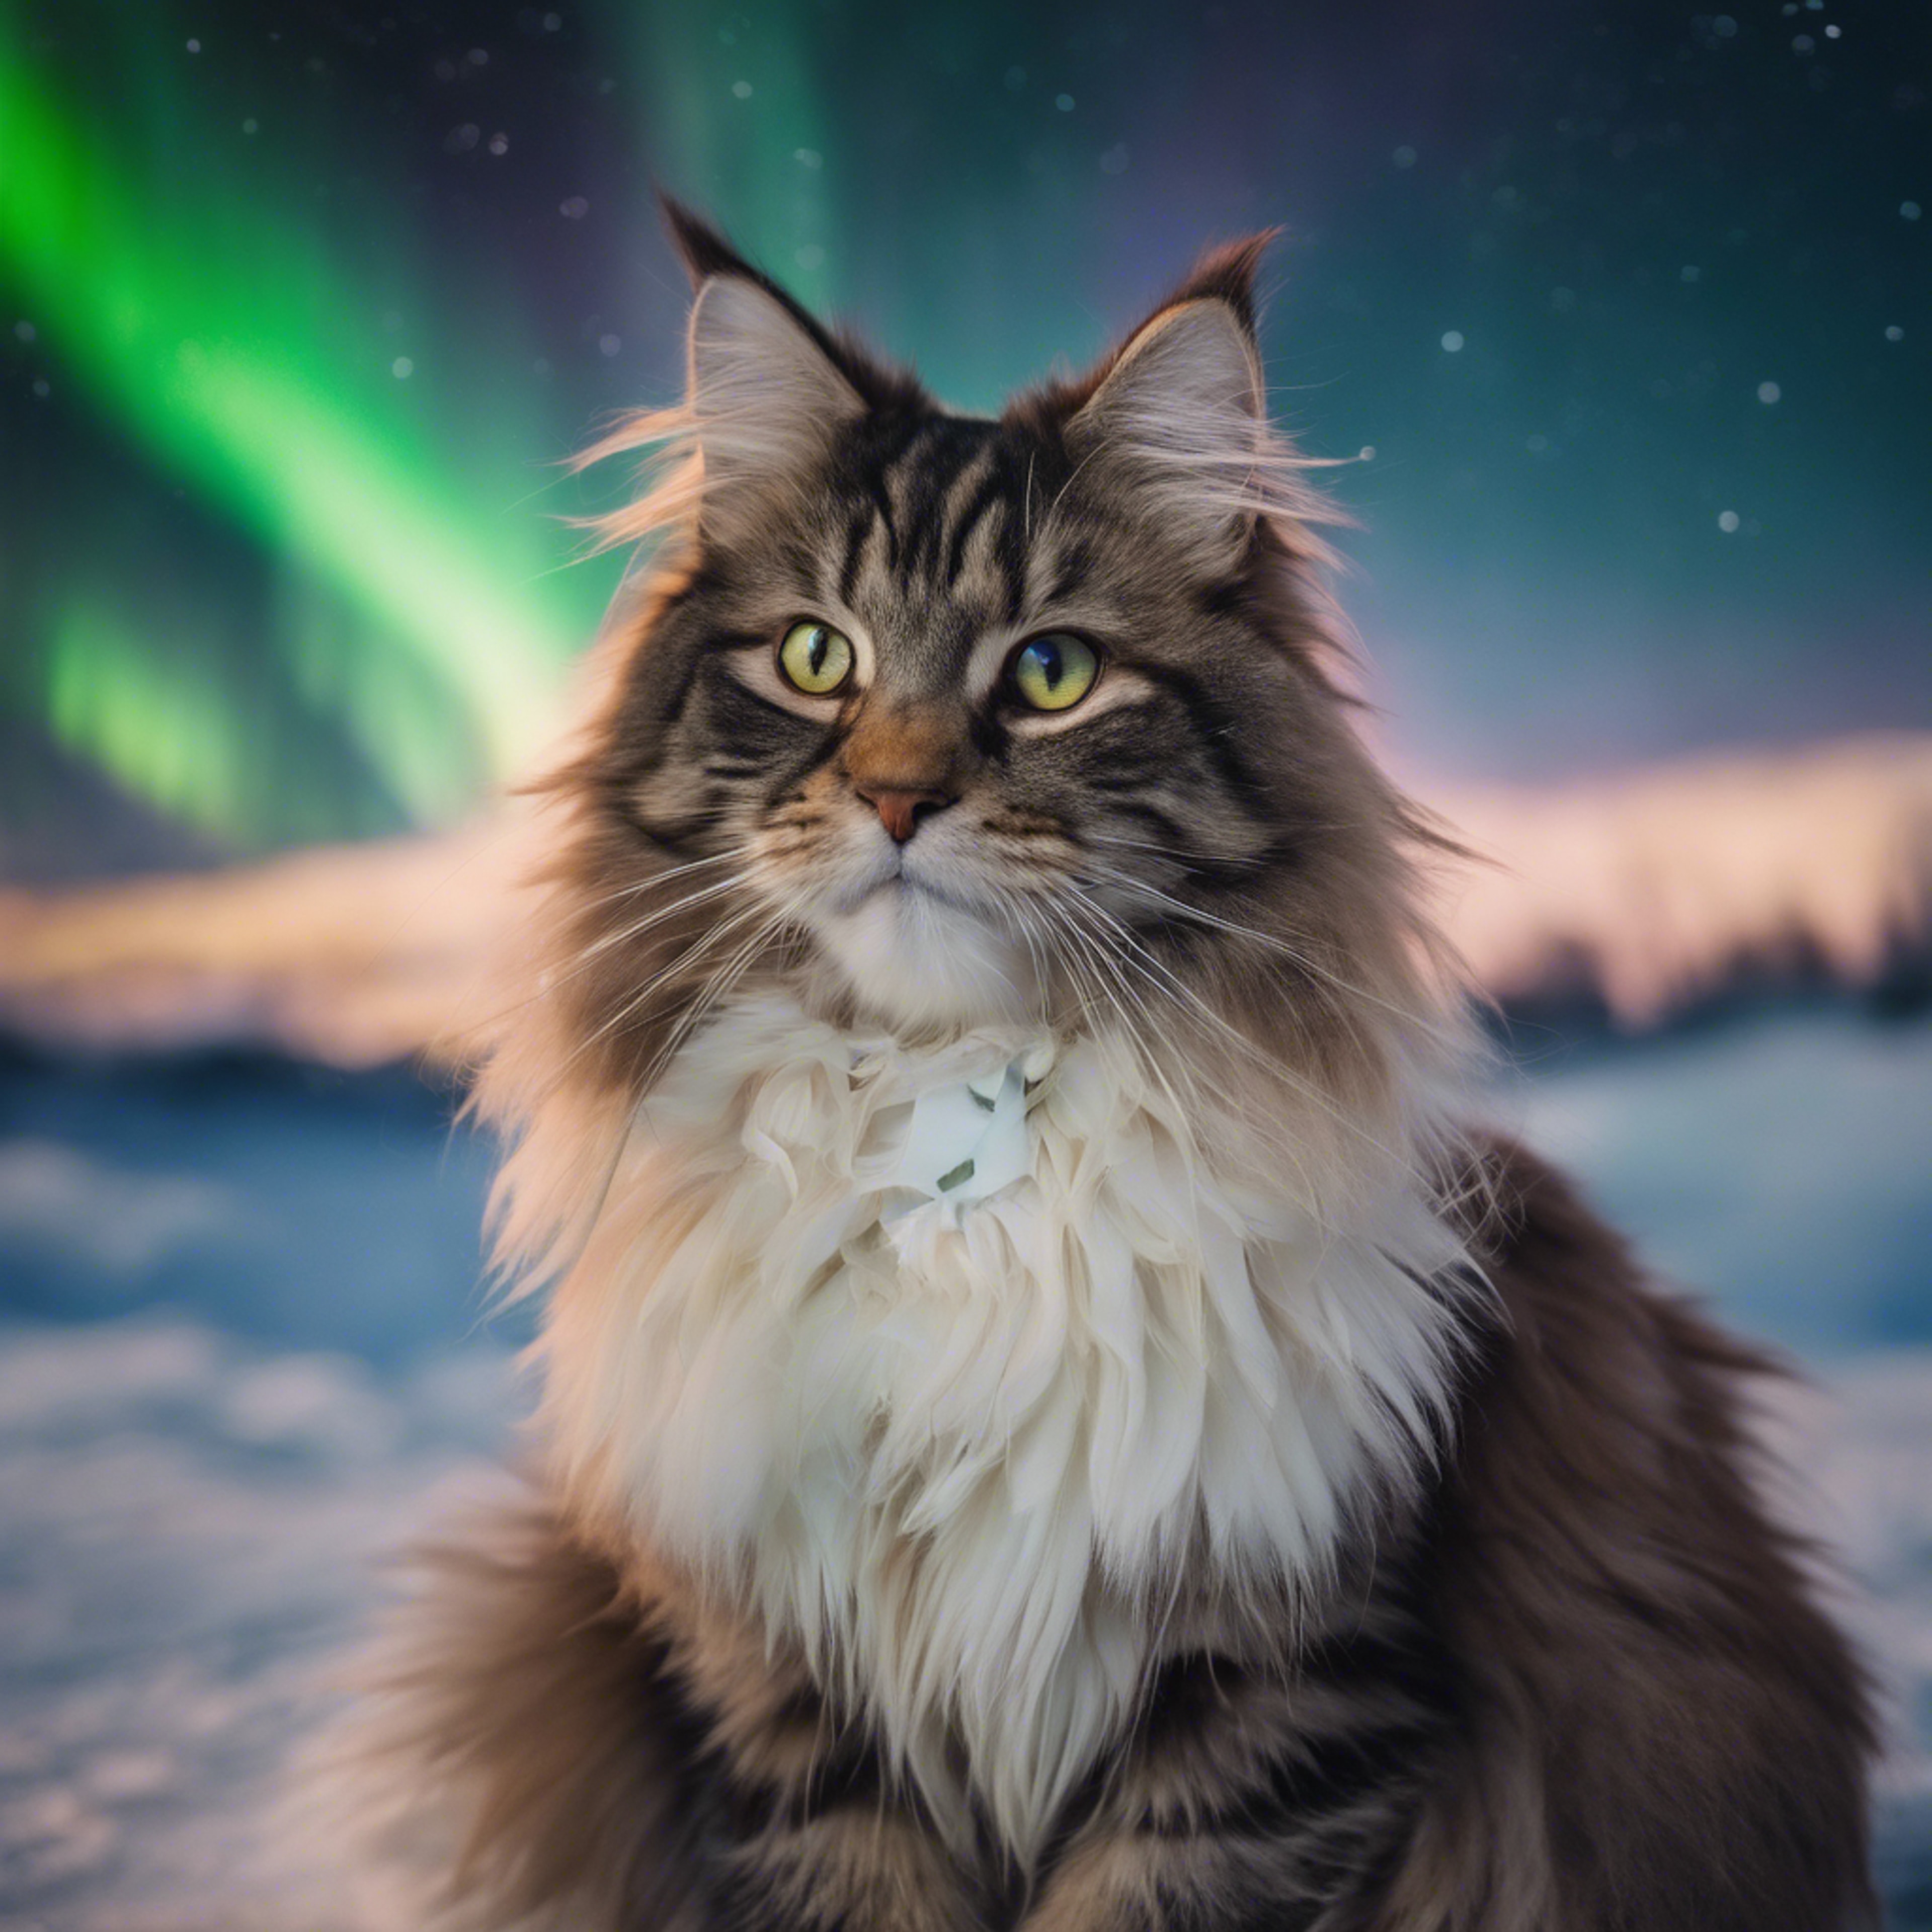 A Norwegian Forest cat sitting quietly under the aurora borealis, its eyes reflecting the dancing lights. Papel de parede[1b2a9174317e40c9a8f4]